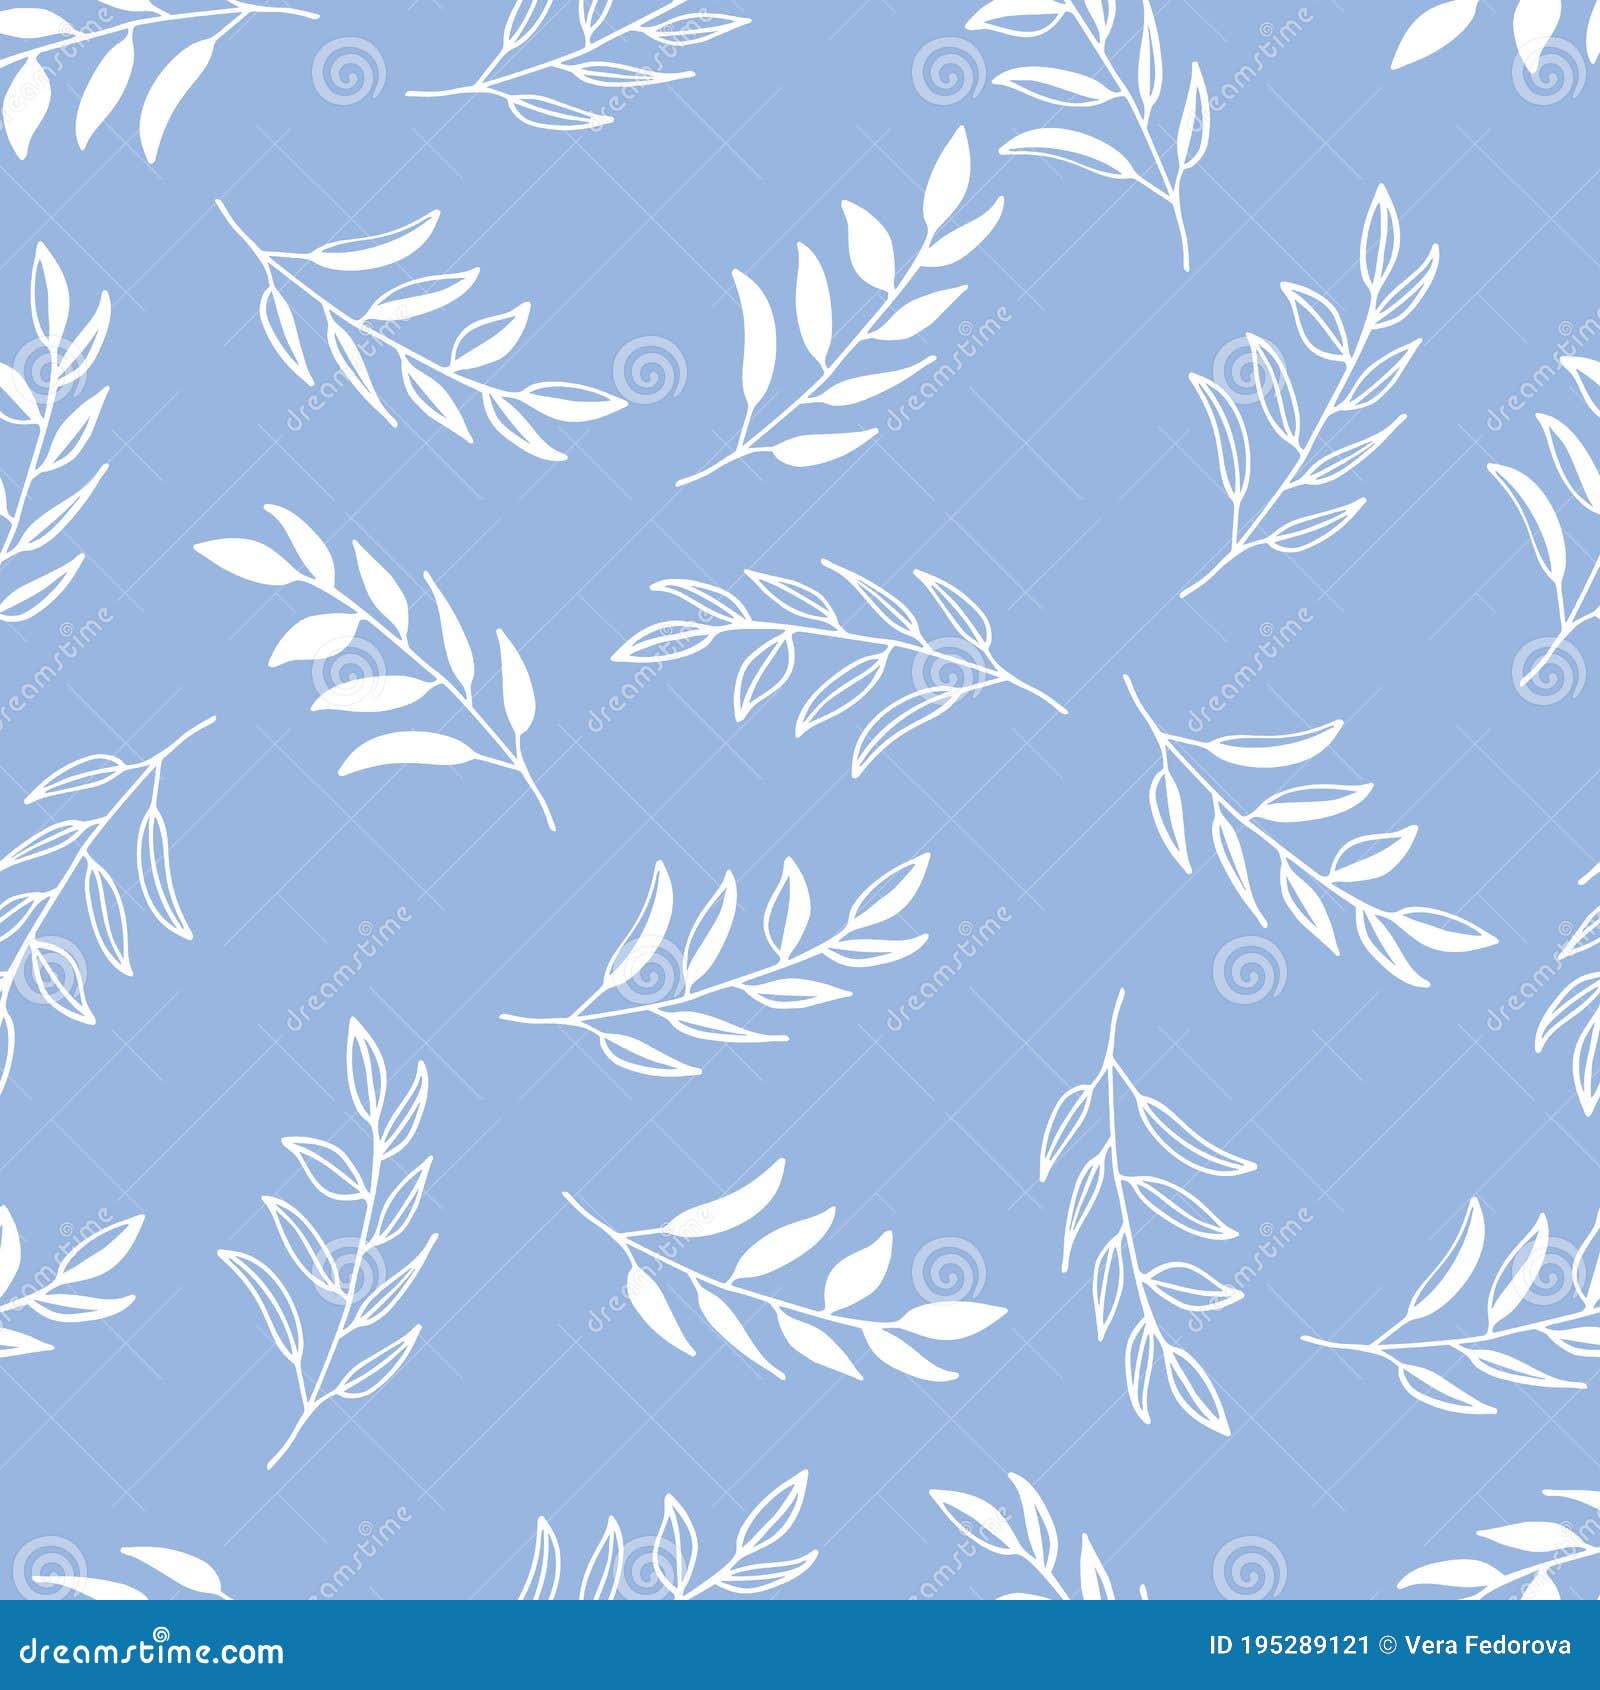 Hand Drawn Floral Seamless Pattern. Branches on Pastel Blue Background  Stock Vector - Illustration of postcard, blue: 195289121